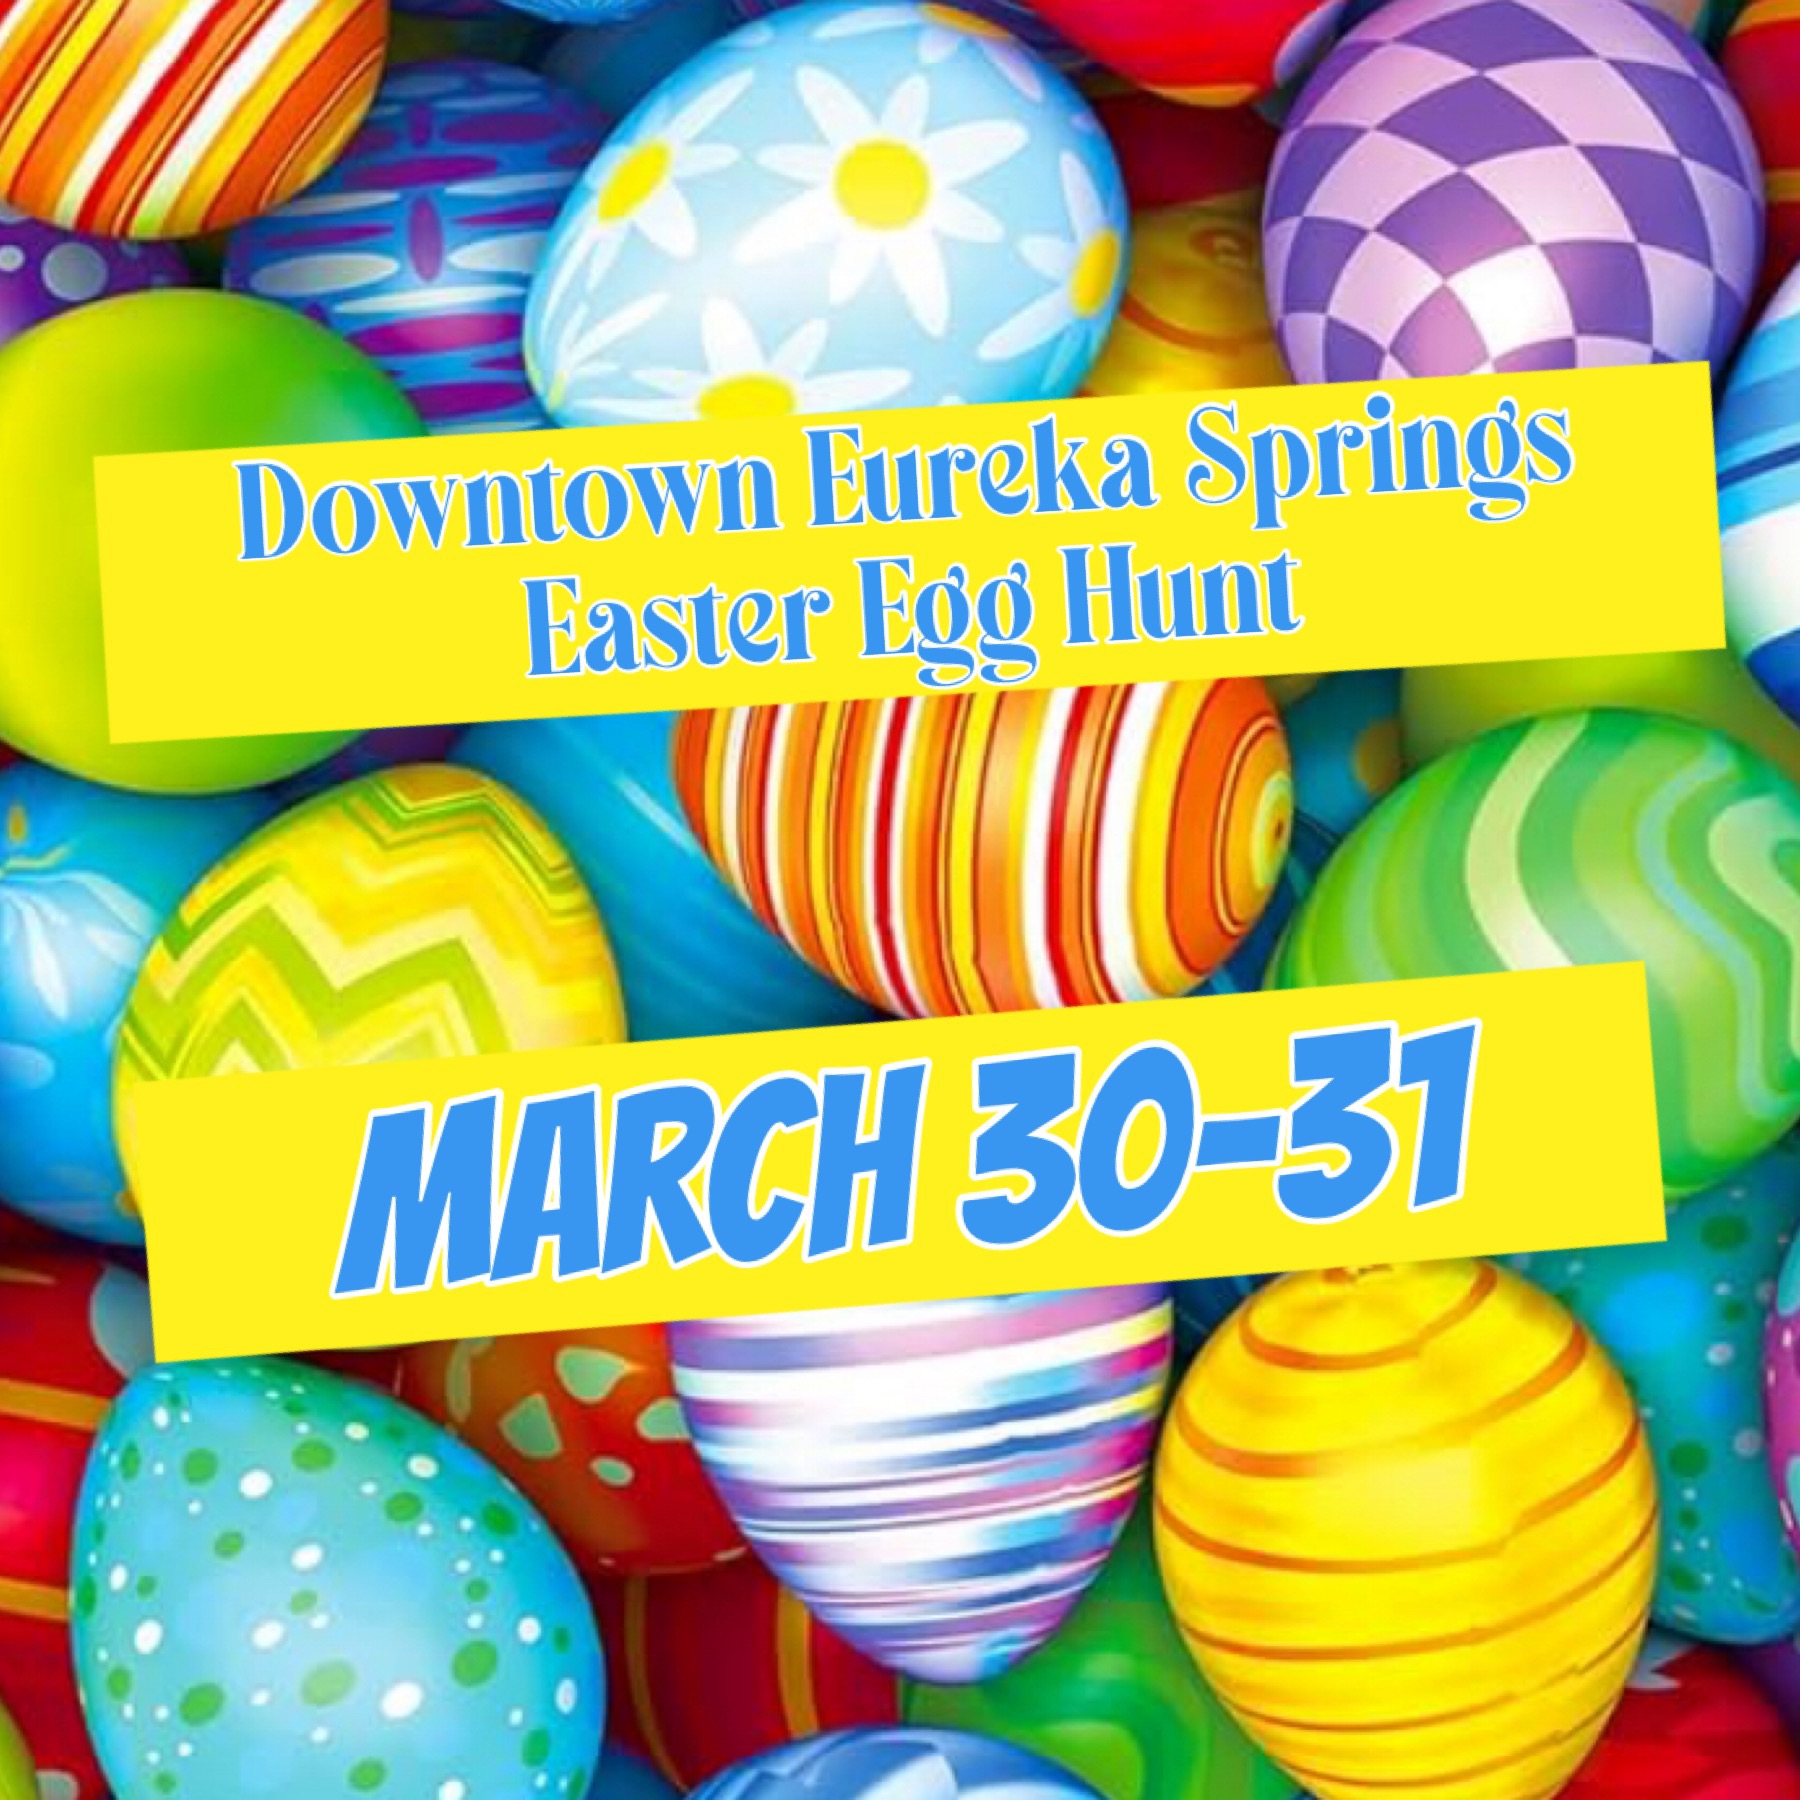 Featured image for “Downtown Eureka Springs Easter Egg Hunt”